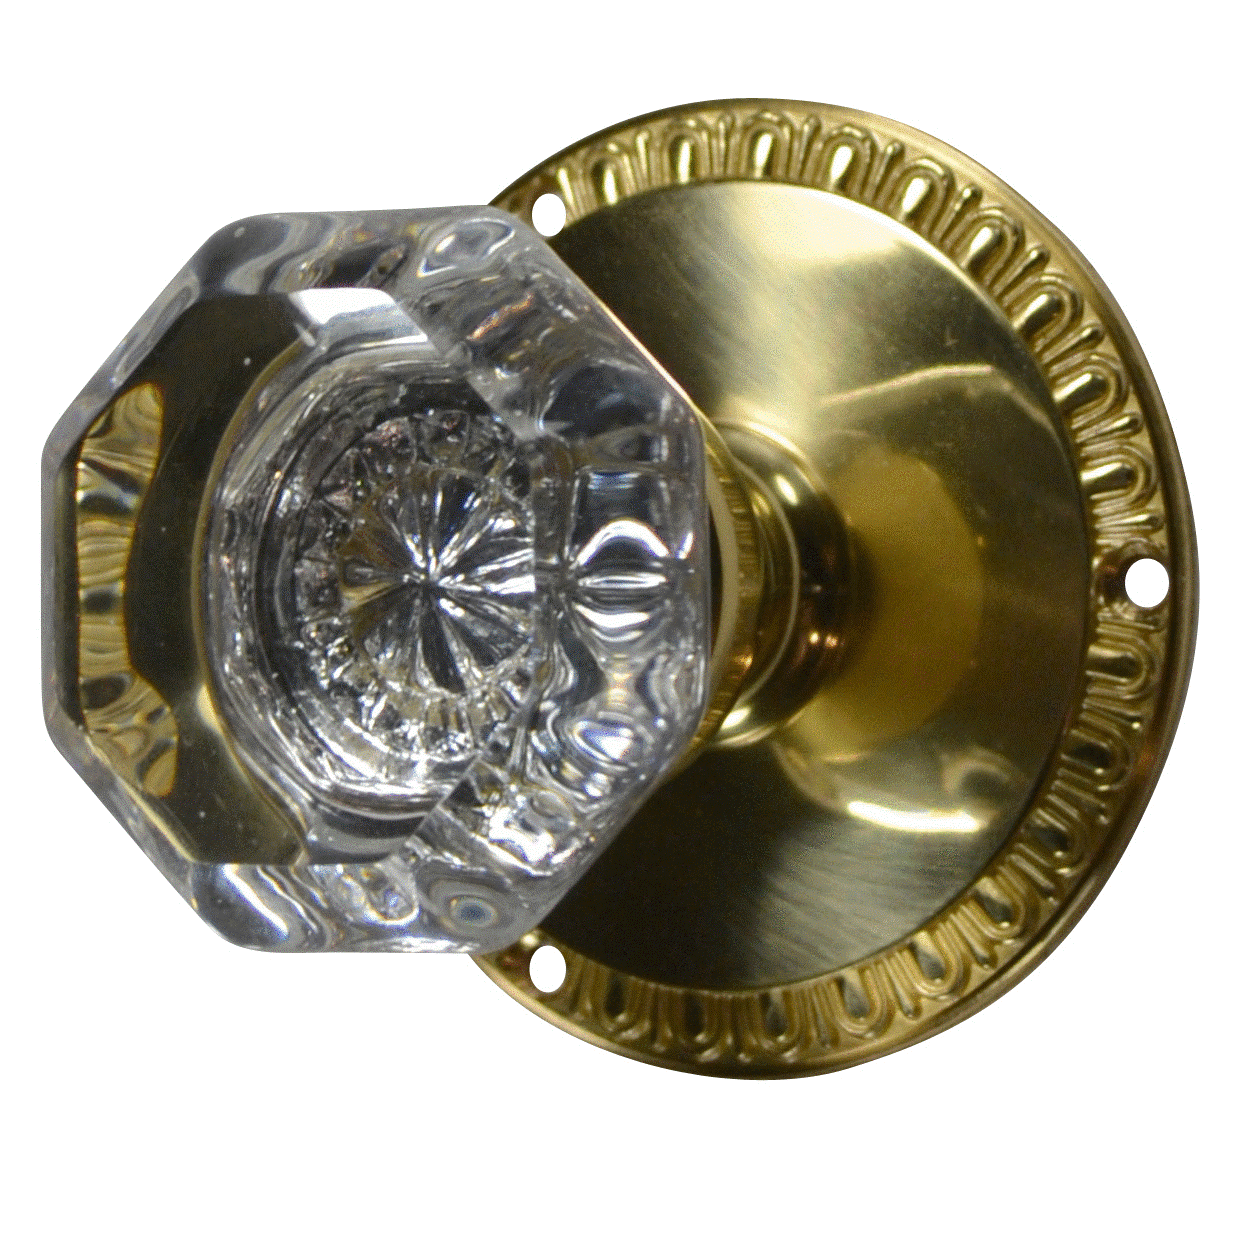 Egg & Dart Rosette Door Set with Octagon Crystal Door Knobs (Several Finishes Available)